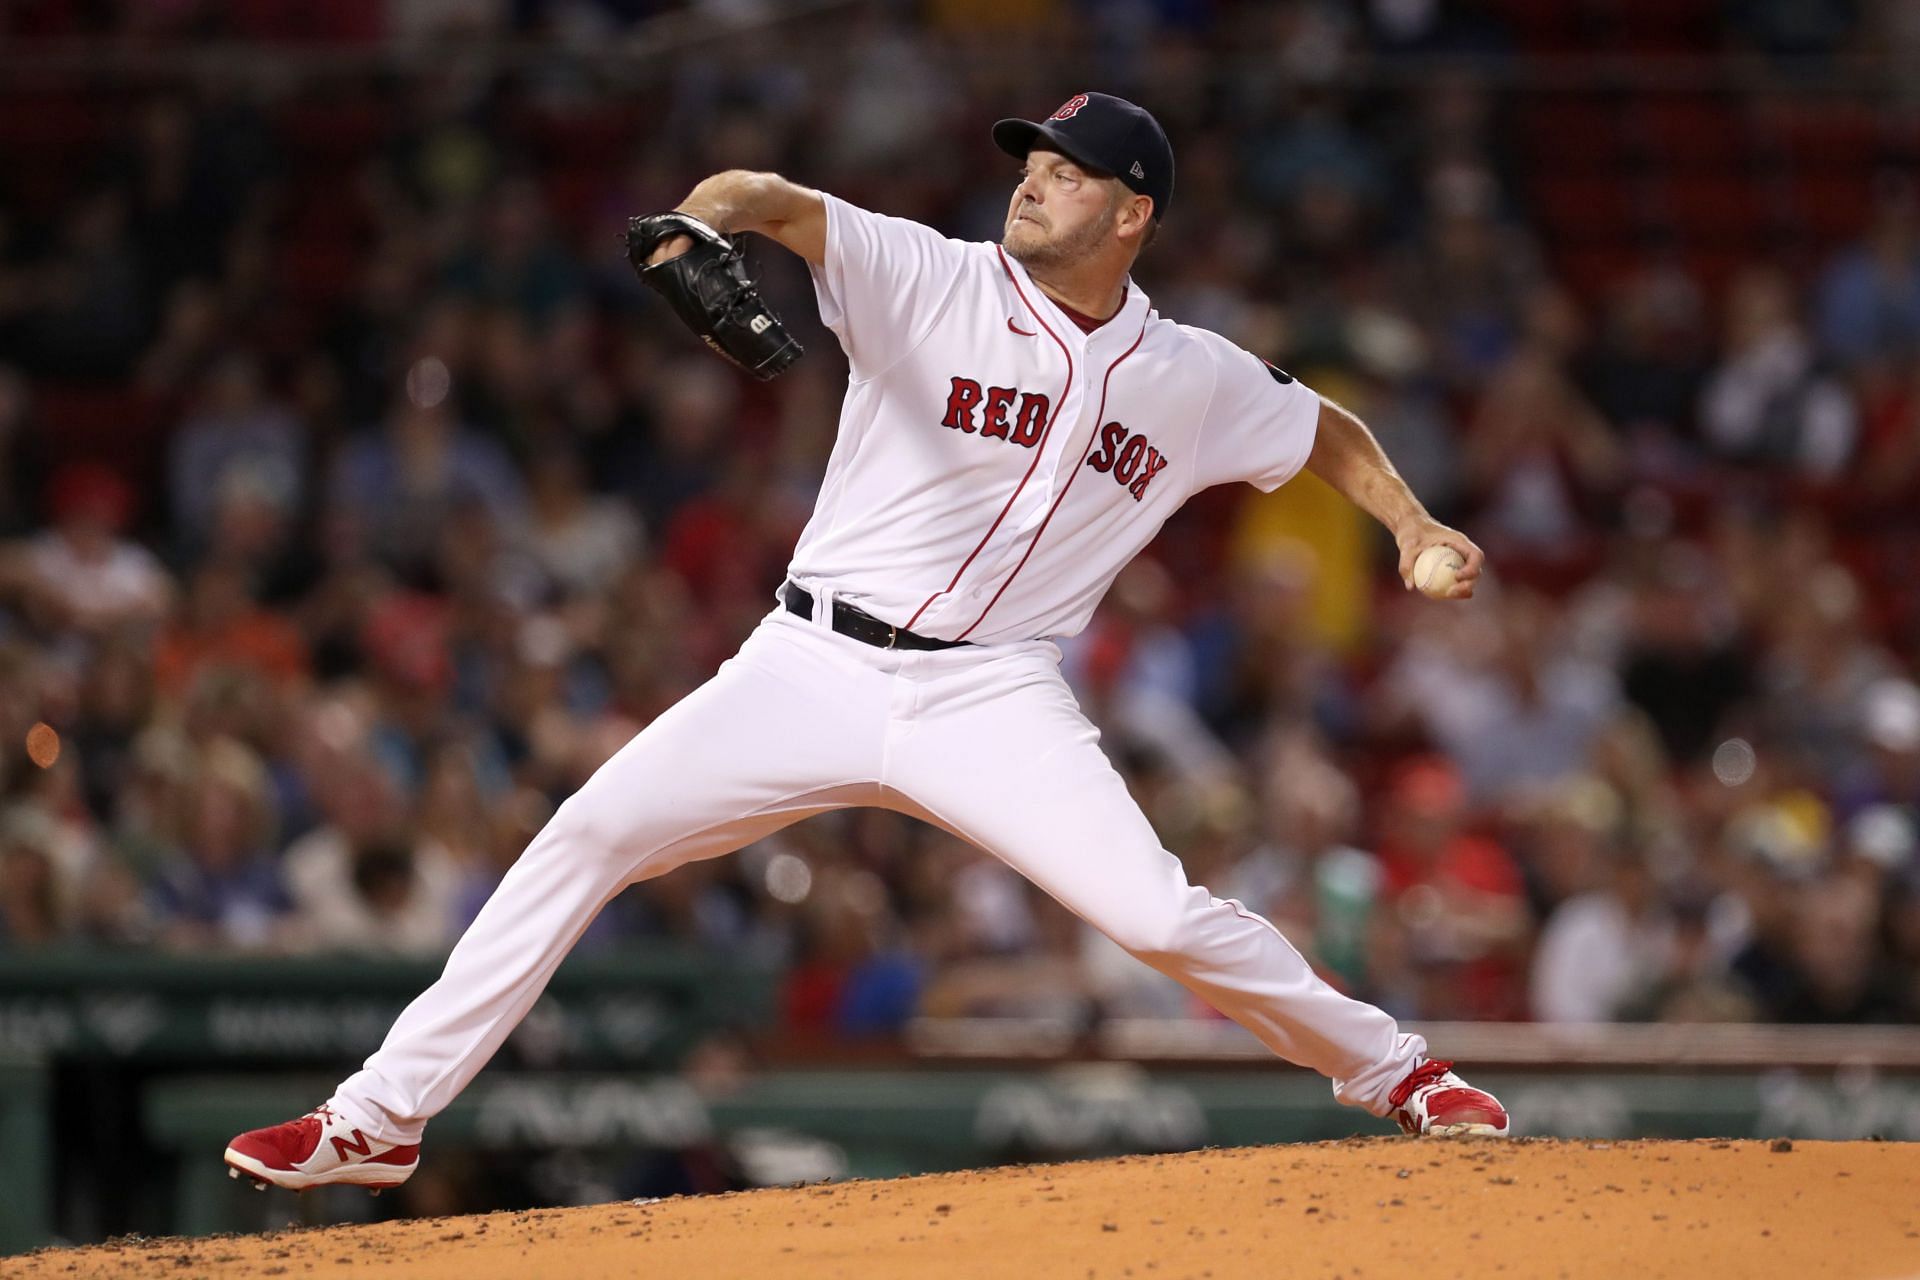 Rich Hill played a one-year contract with the Red Sox in 2022.